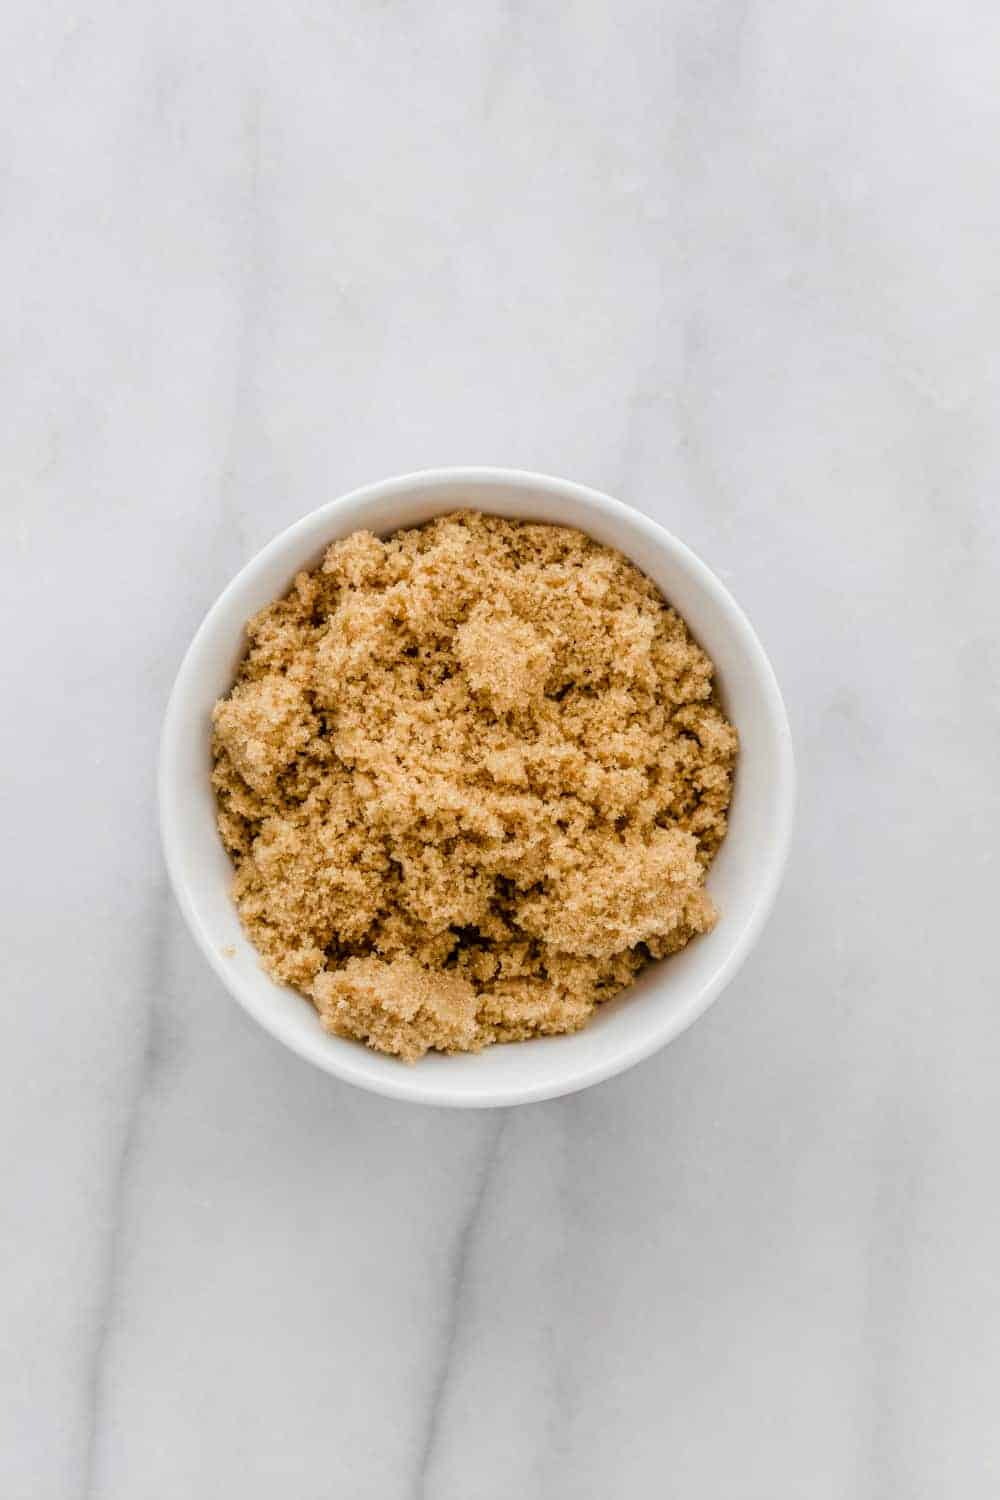 Sugar is one of the most important baking ingredients we use. Find out how to use the different types of sugar, including brown sugar.